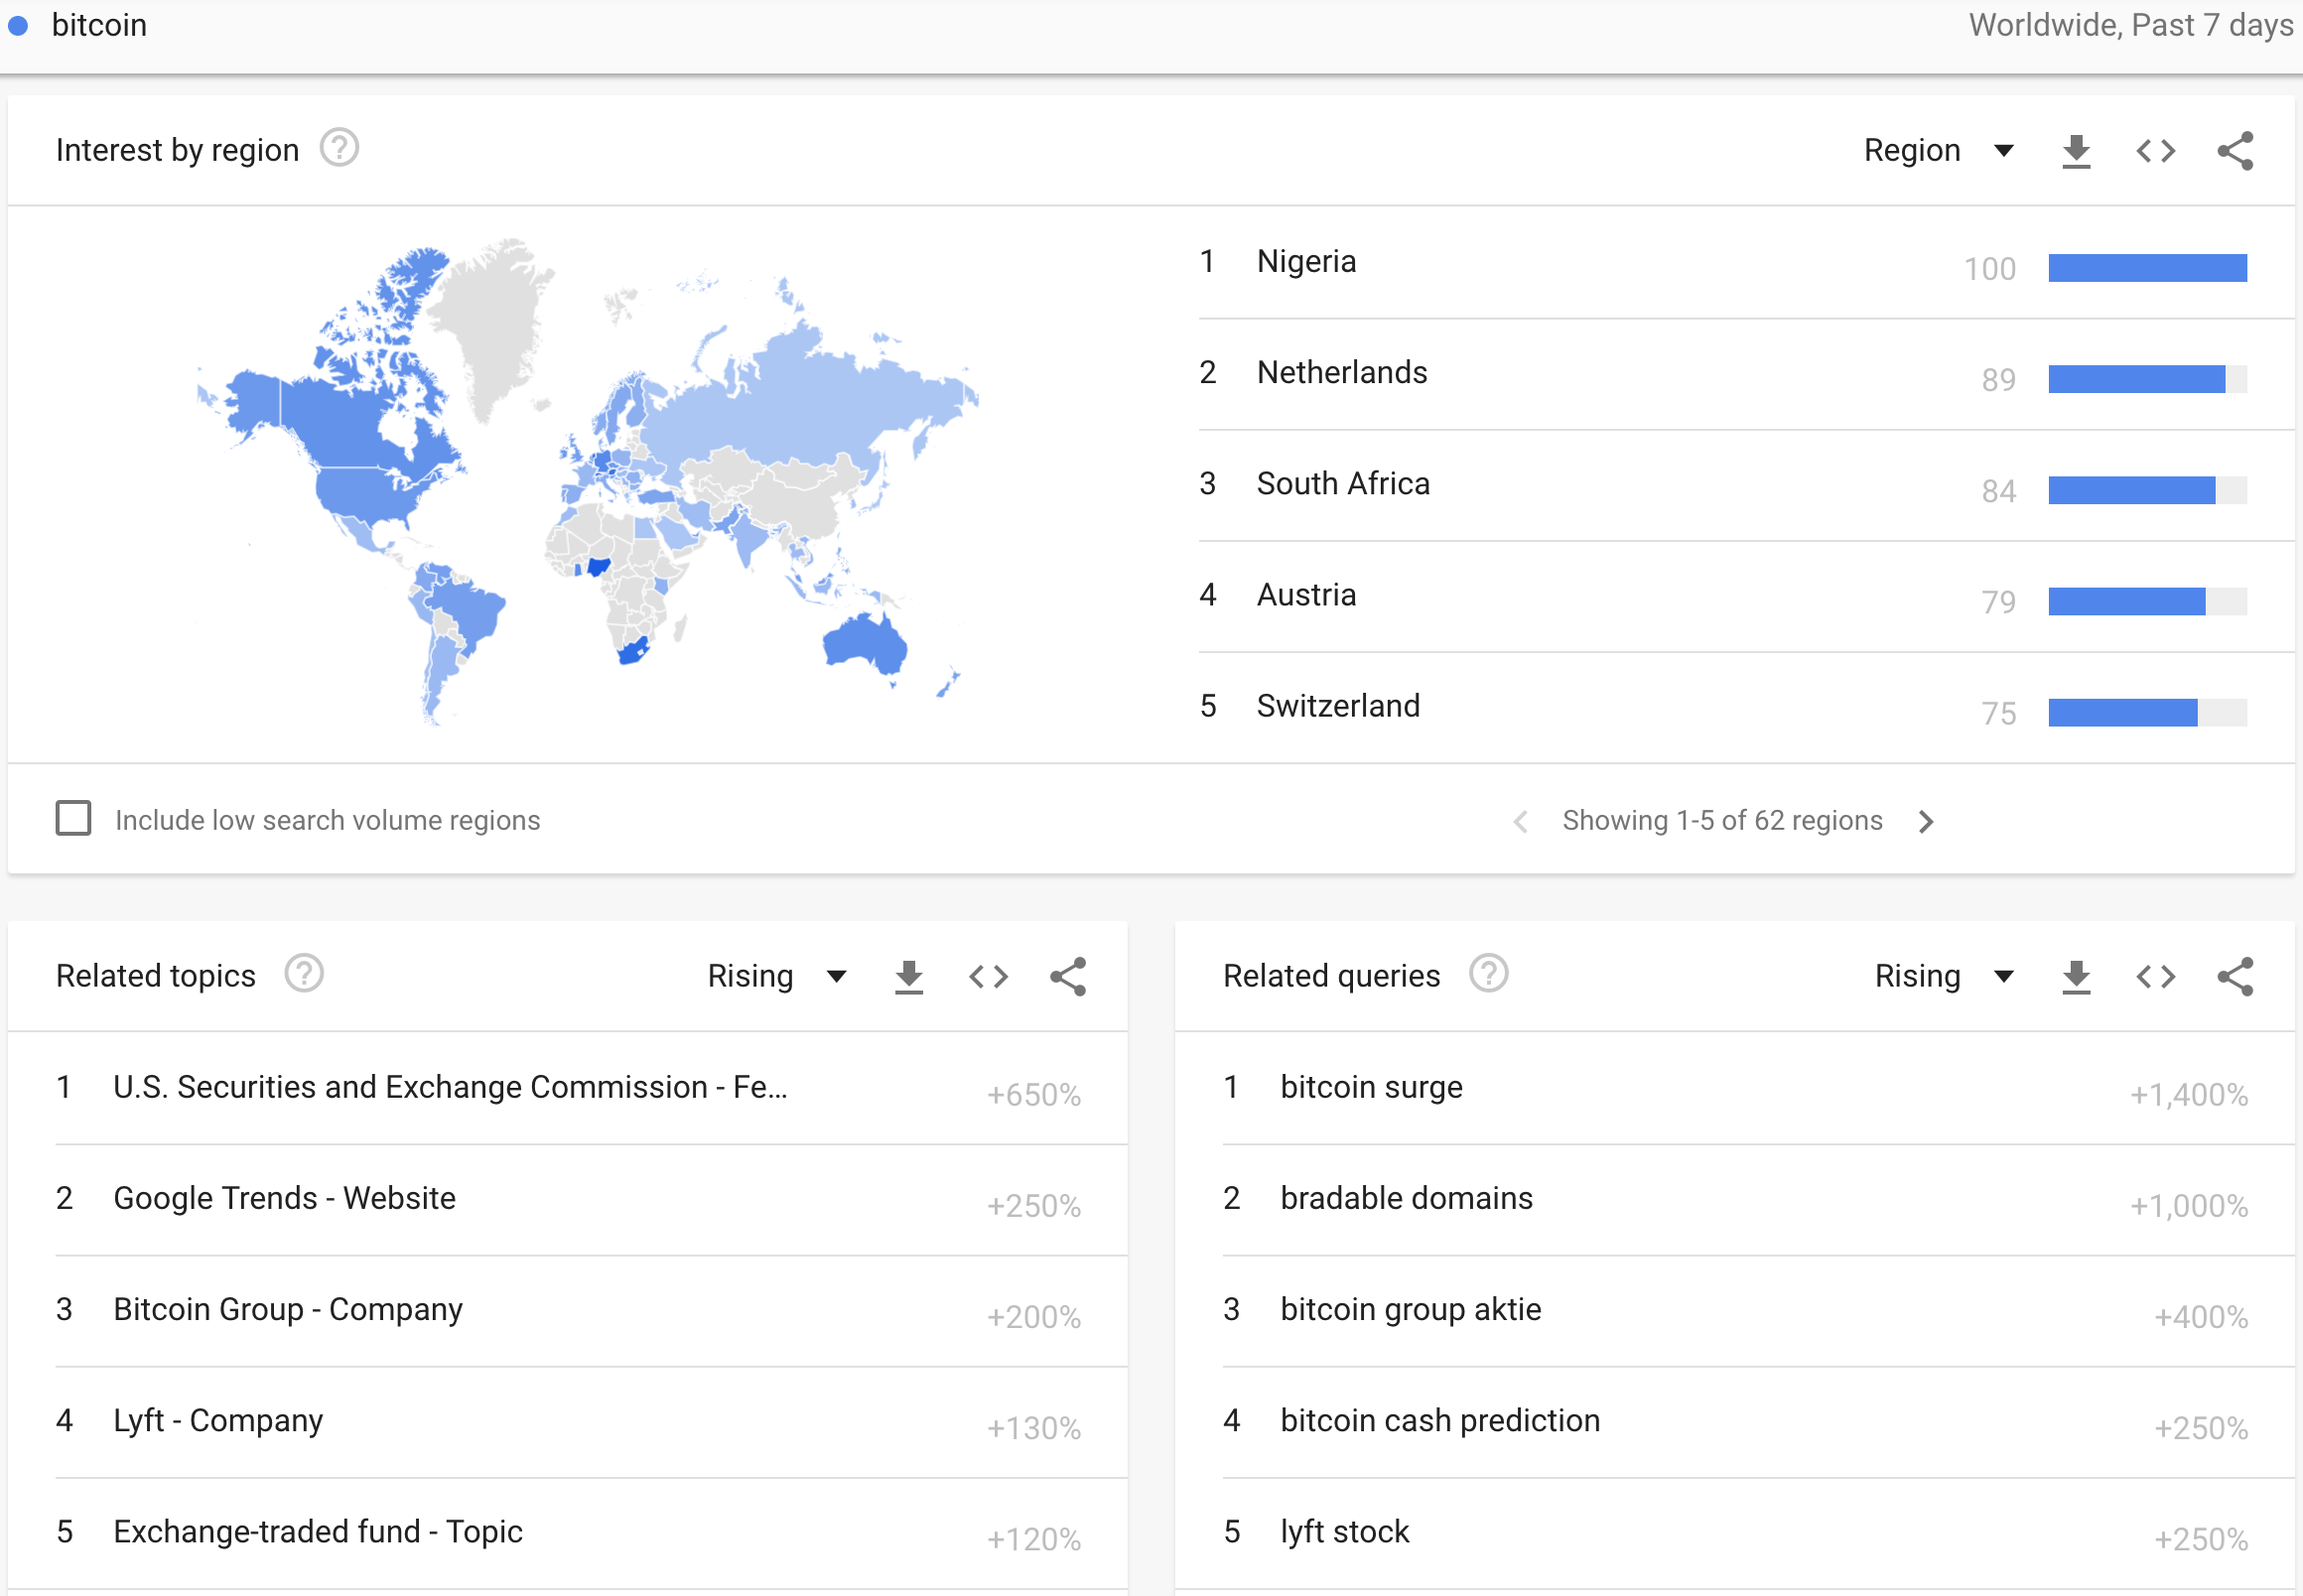 Over the last 7 days, African and European nations have led the (English) search interest in Bitcoin. The related topics and related queries reveal that the global interest extends to other avenues of speculation like the IPO for Lyft (LYFT).